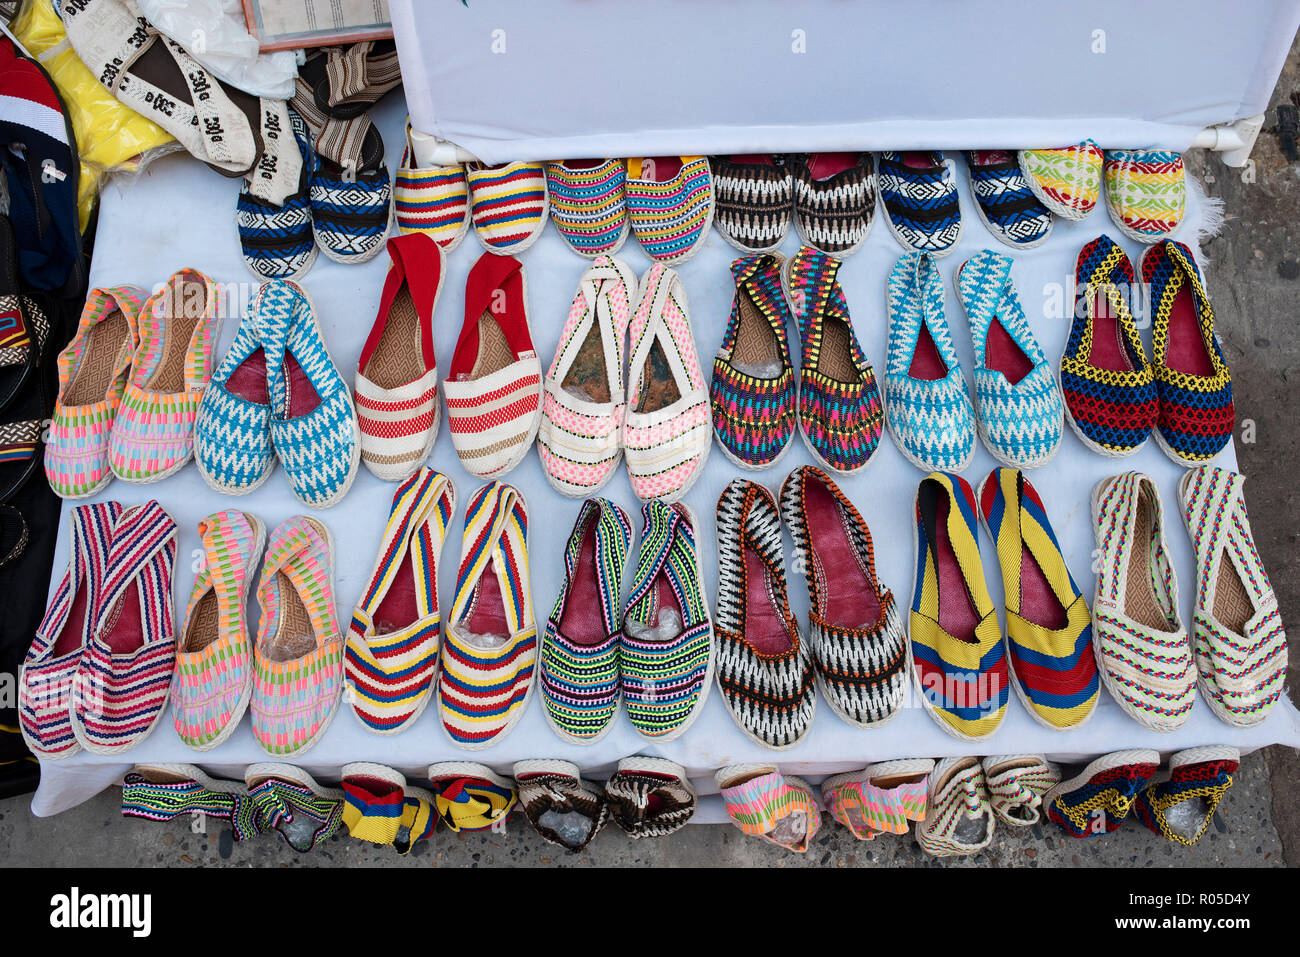 Handmade espadrilles (footware) for sale on the street of de Indias, Colombia. Oct 2018 Stock Photo - Alamy